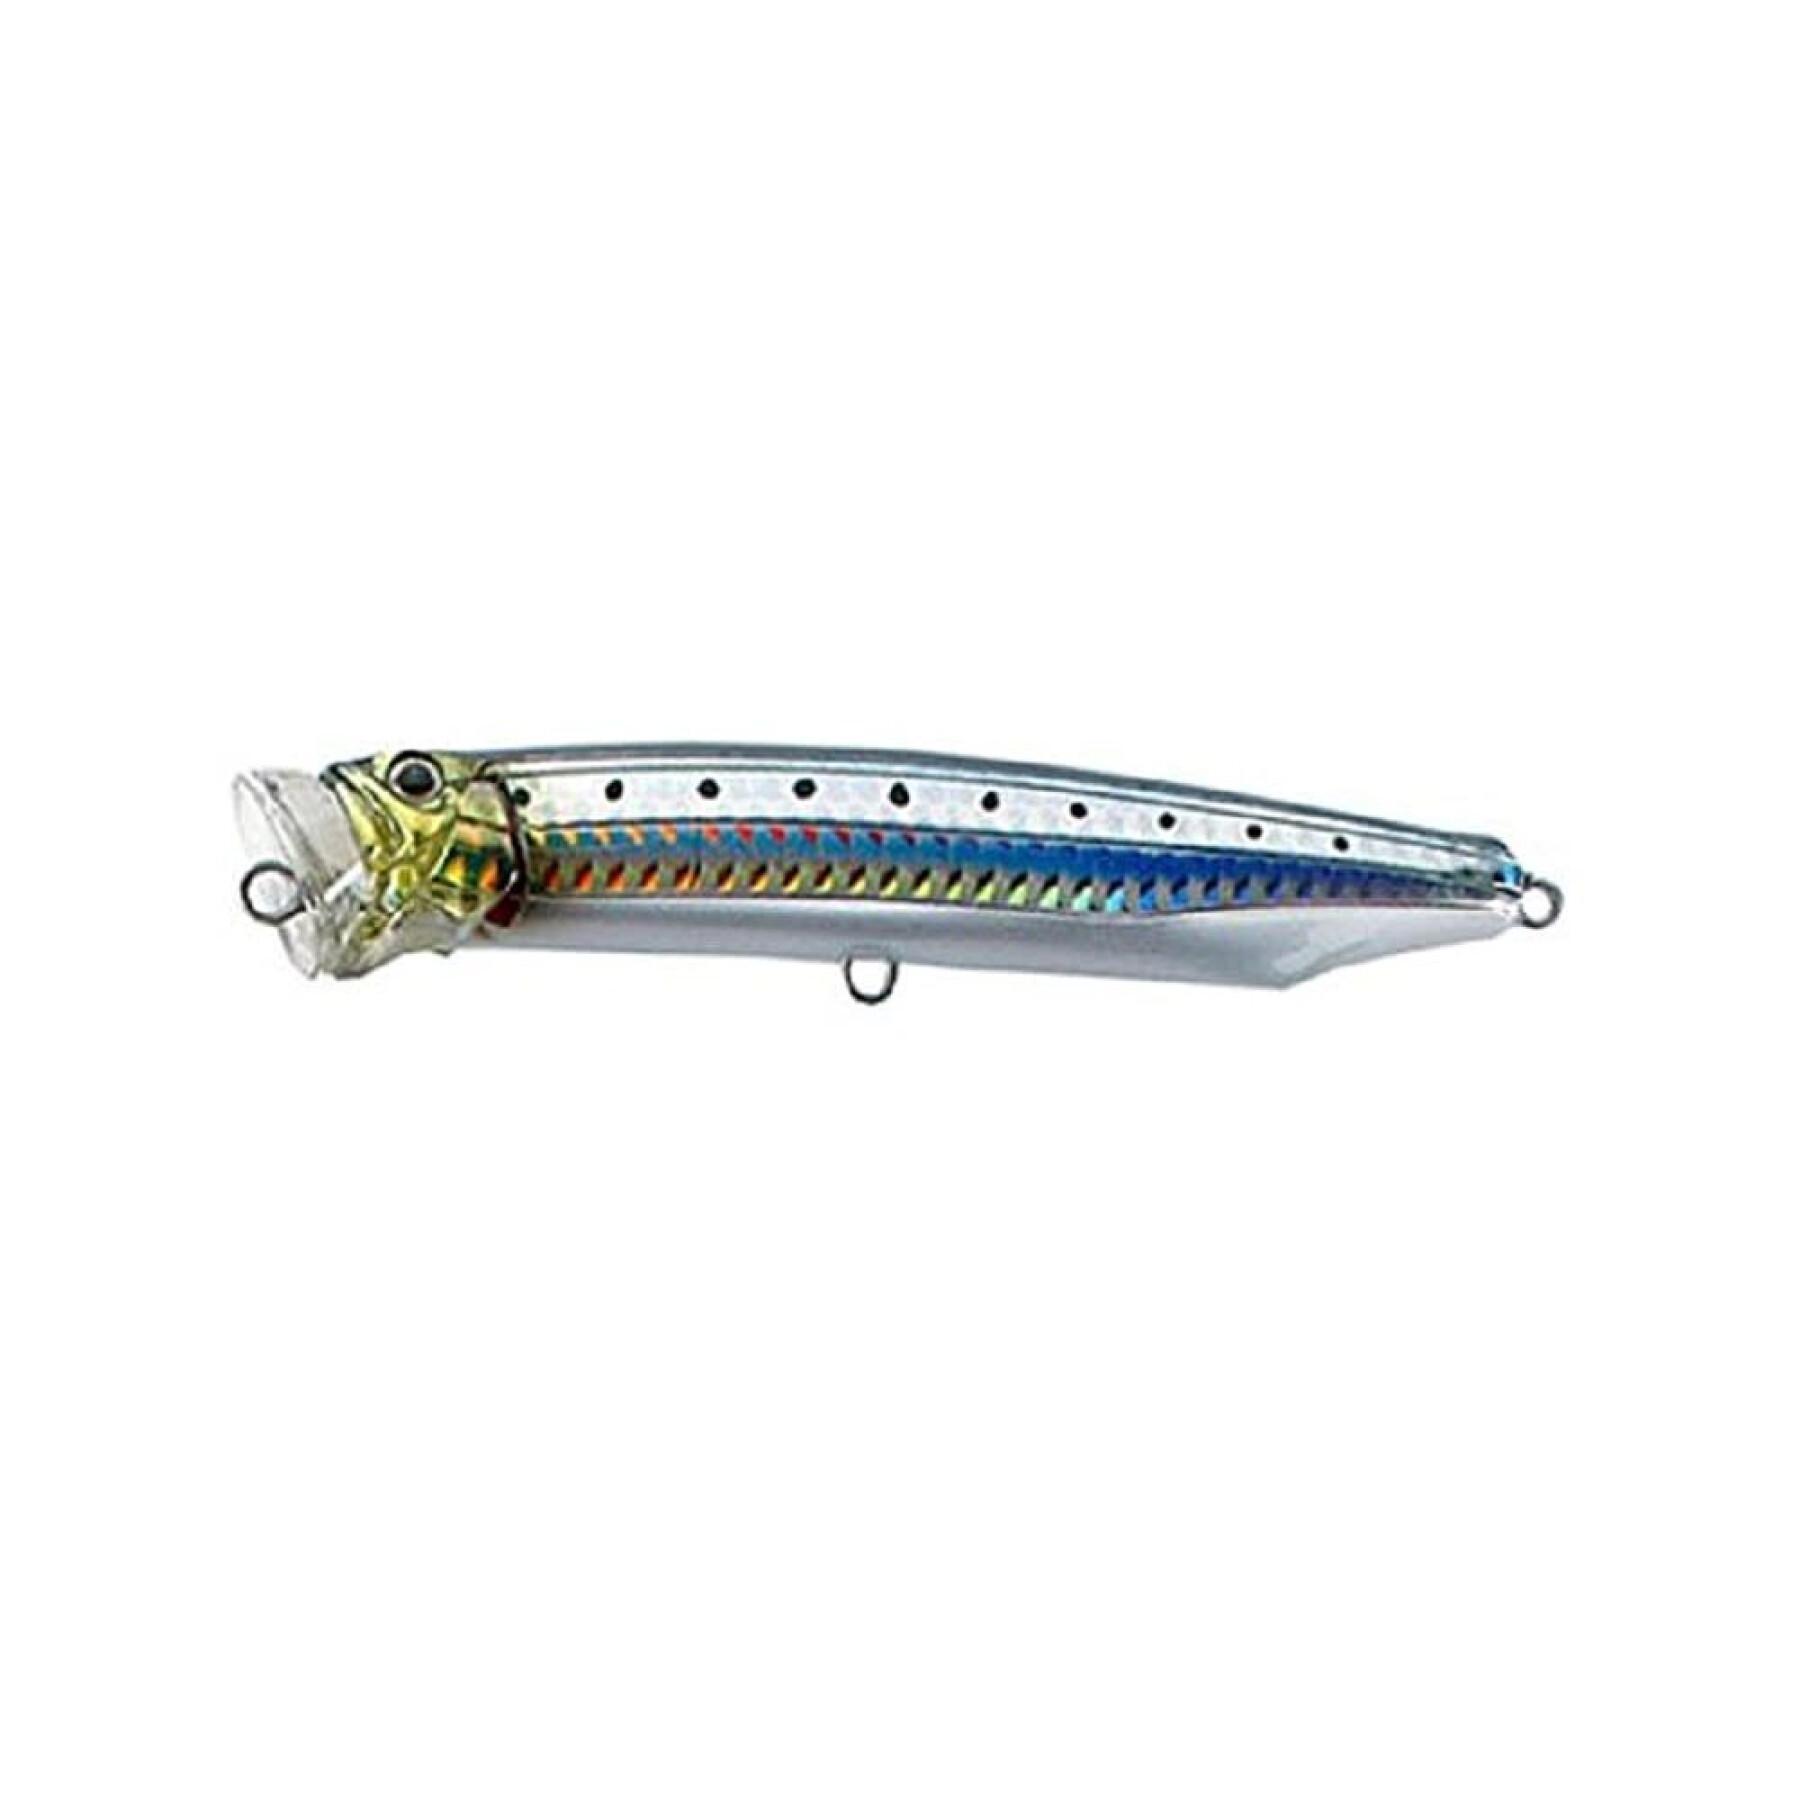 House feed popper 175 - 74g tackle lure - Hard lures - Sea - Fishing